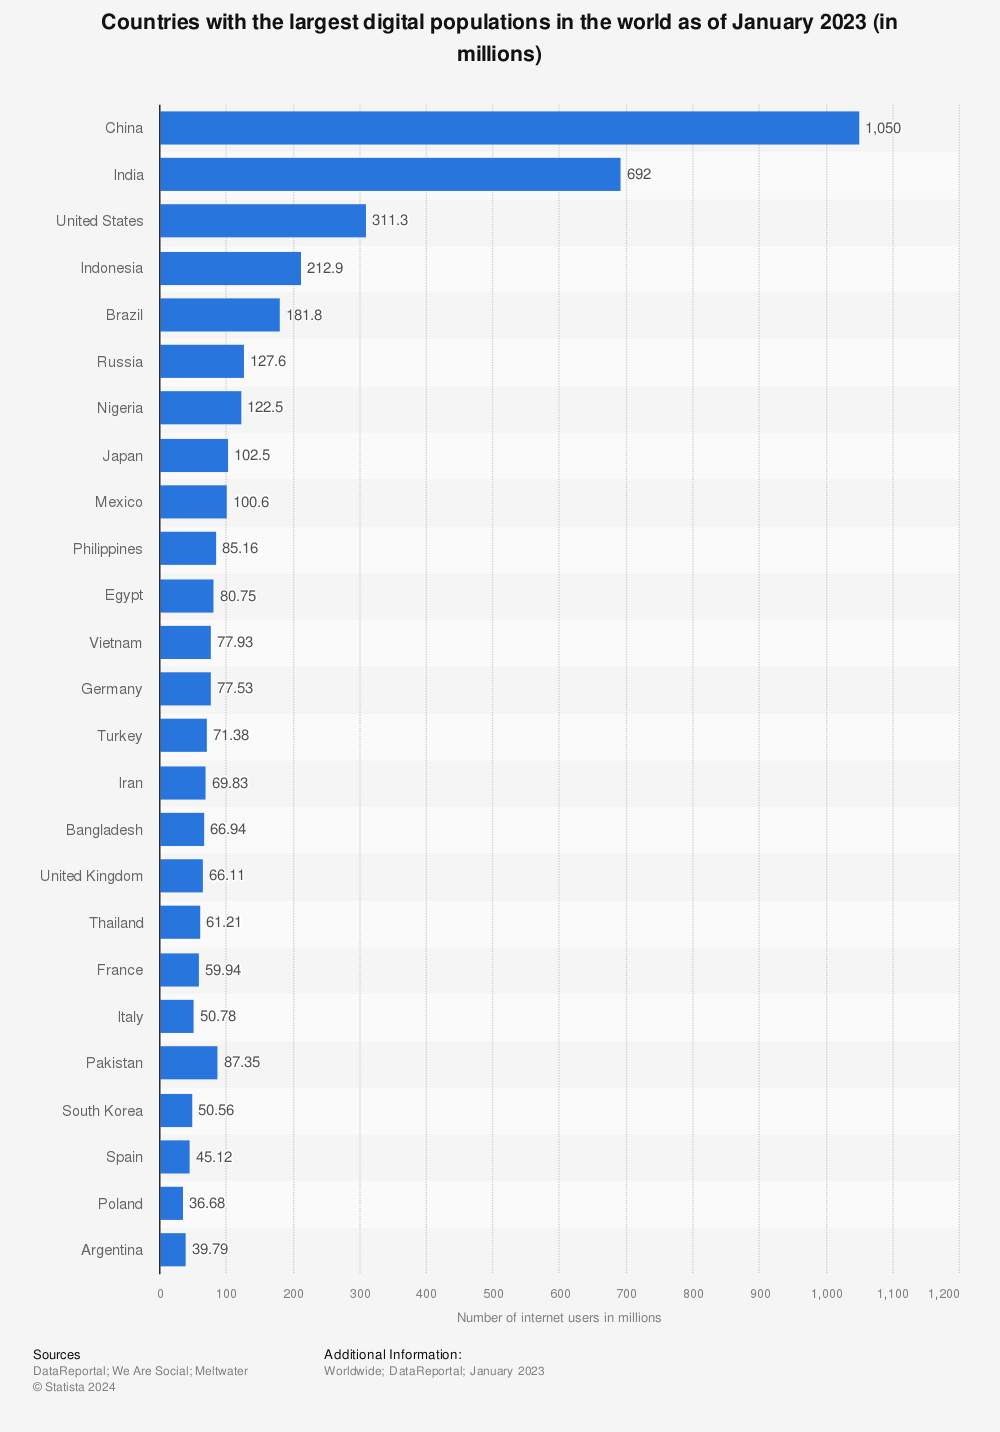 Statistic: Countries with the highest number of internet users as of Q1 2021 | Statista